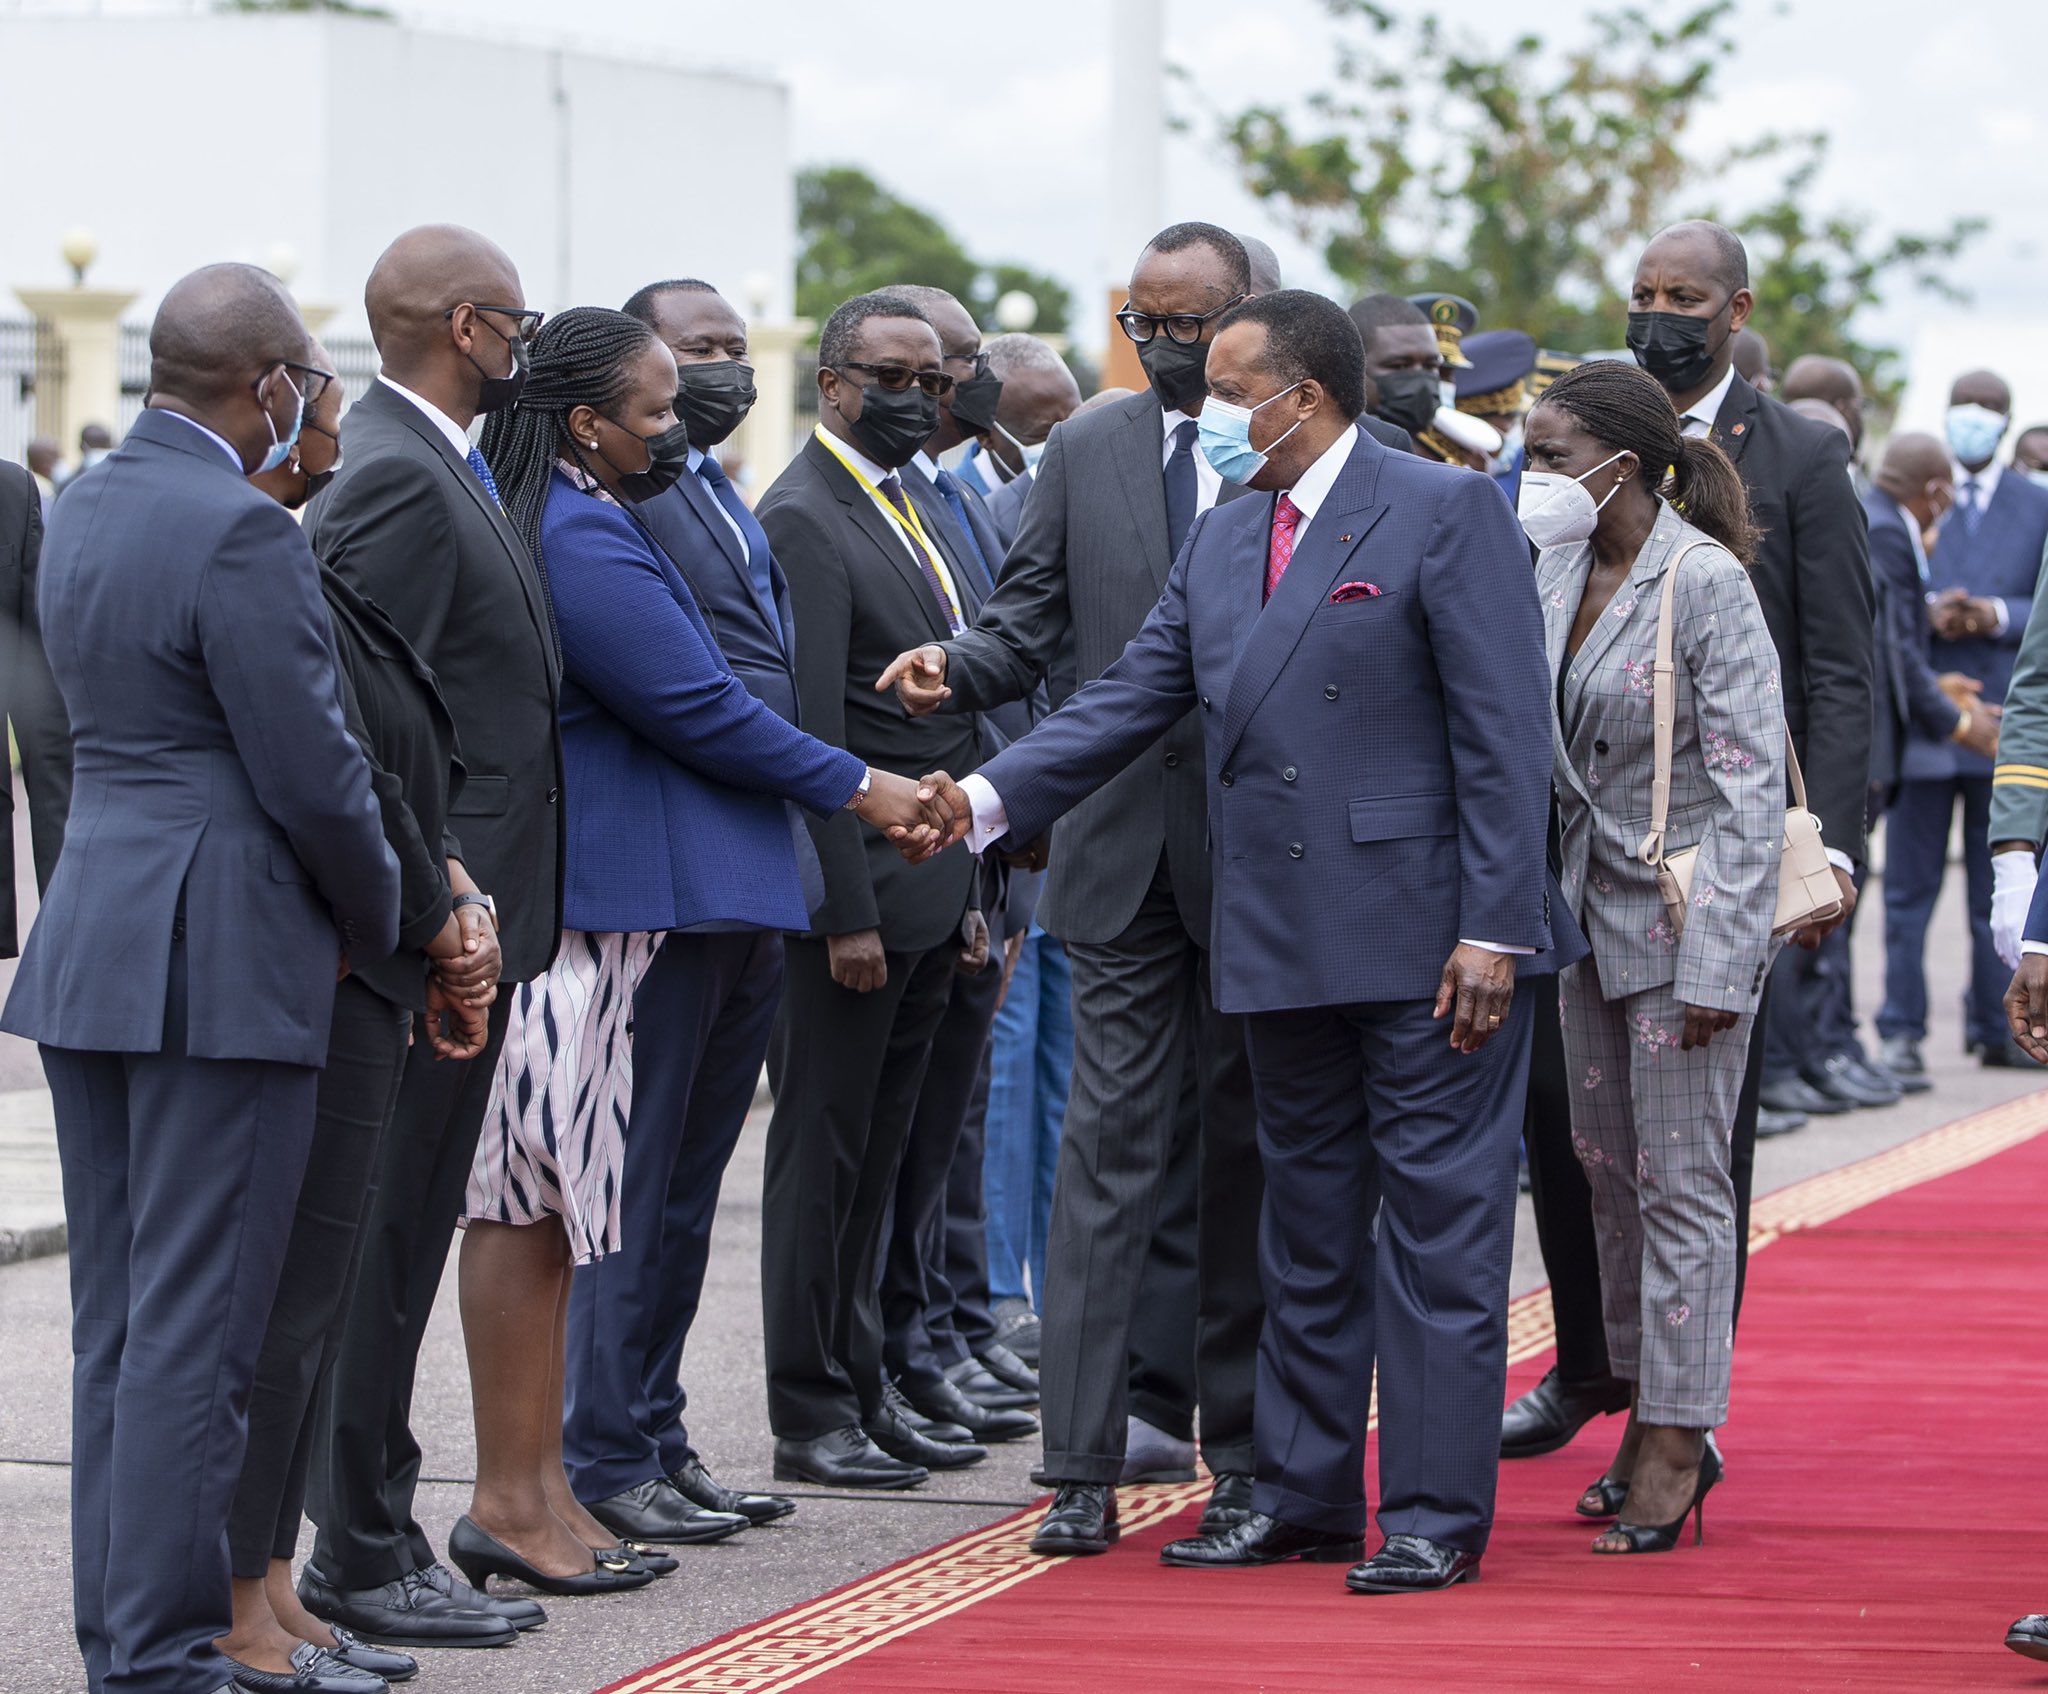 President Sassou Nguesso welcomes President Kagame to Brazzaville for a three day State Visit that will include a visit to Oyo. / Village Urugwiro